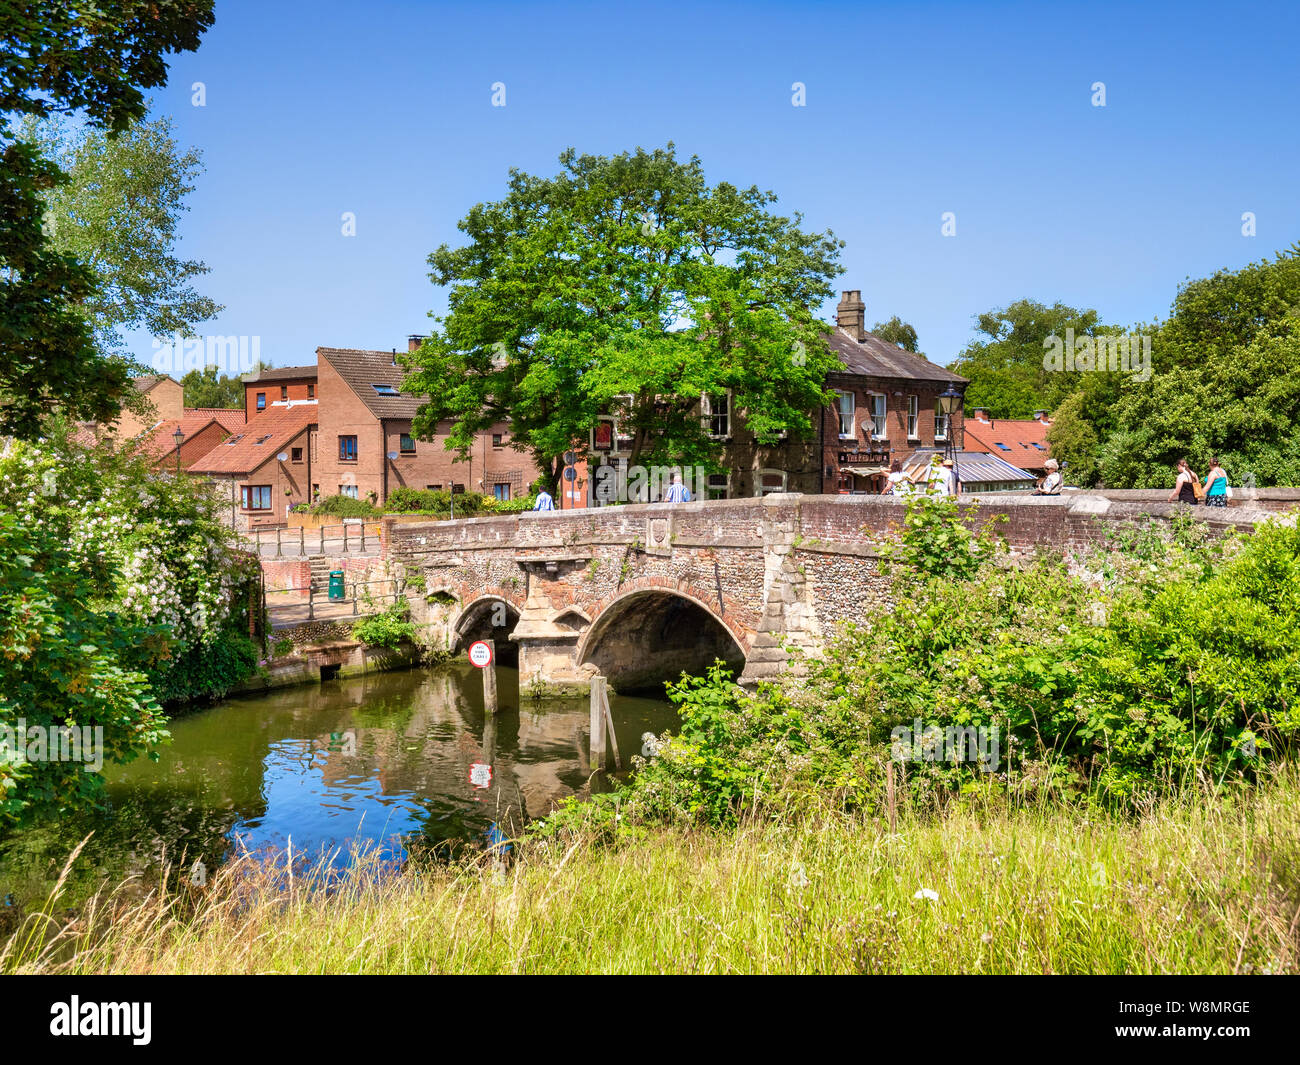 29 June 2019: Norwich, Norfolk, UK - Bishop Bridge, the original of which was built in 1340, spanning the River Wensum, on a fine summer day, clear bl Stock Photo